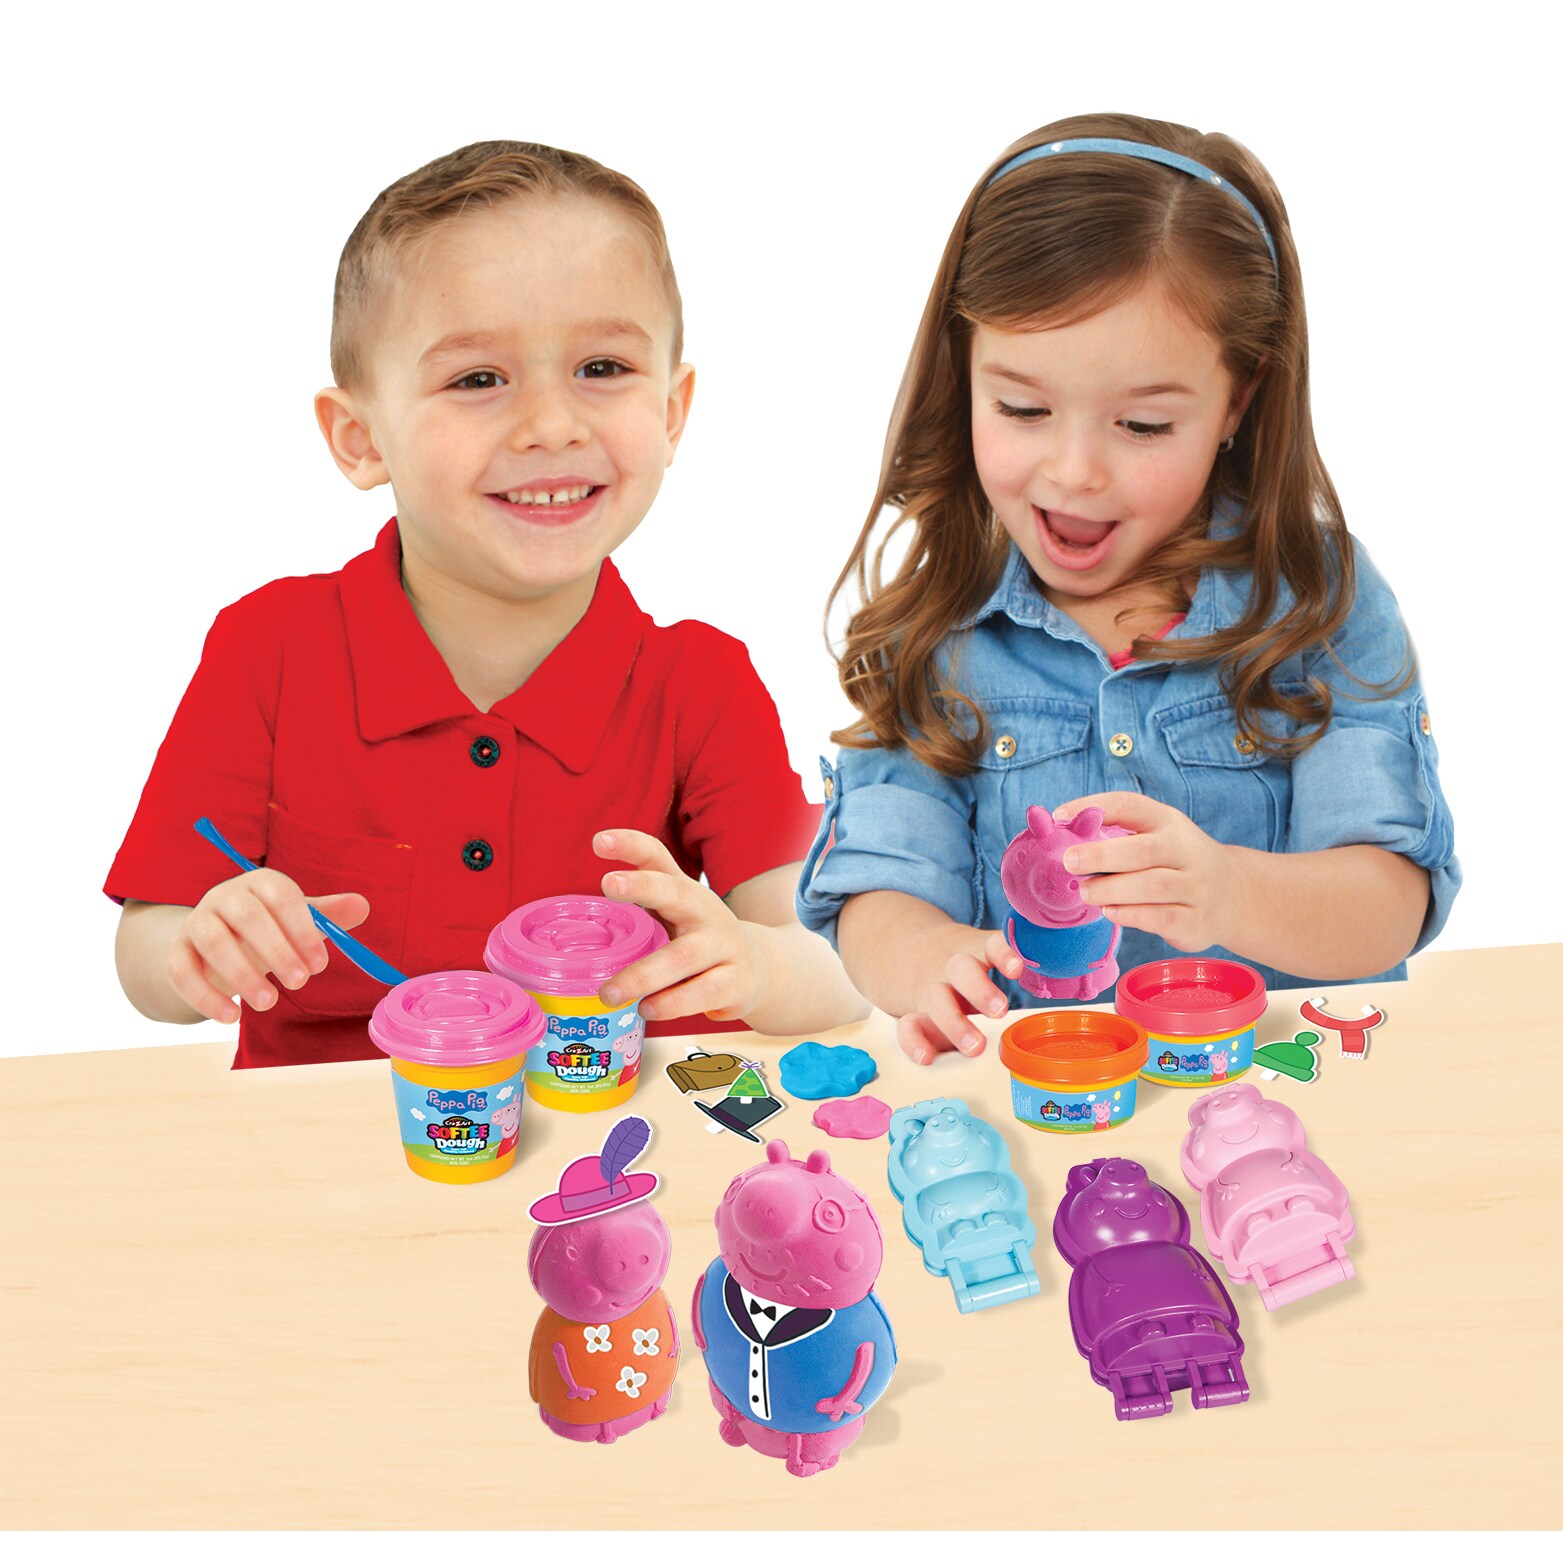 peppa pig mould and play